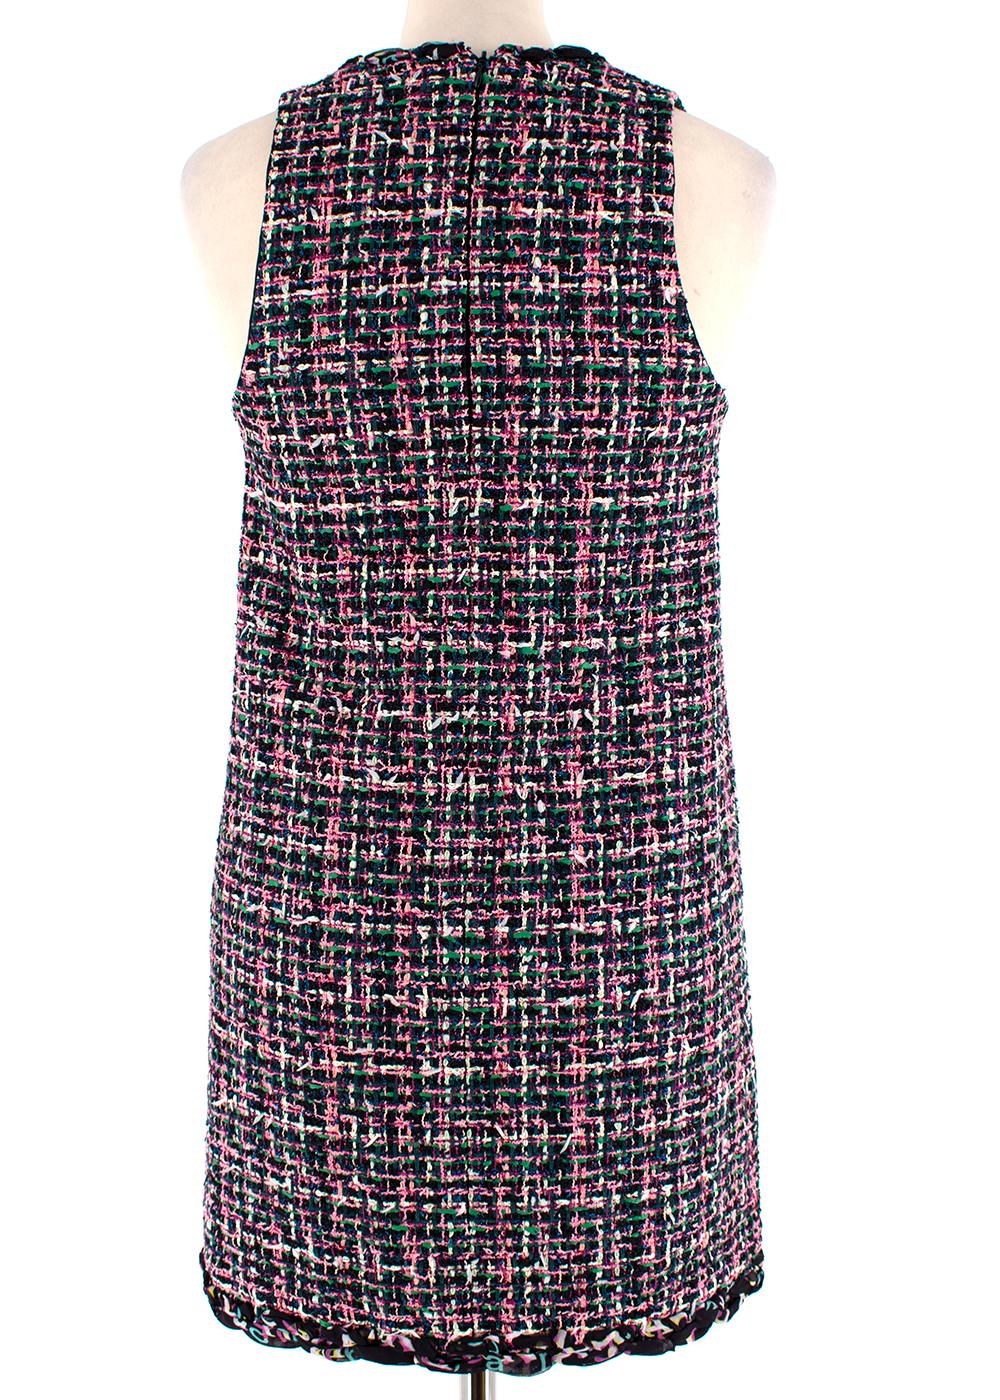 Black Chanel Pink Boucle Tweed Bow Detail Mini Dress - Size US 0-2